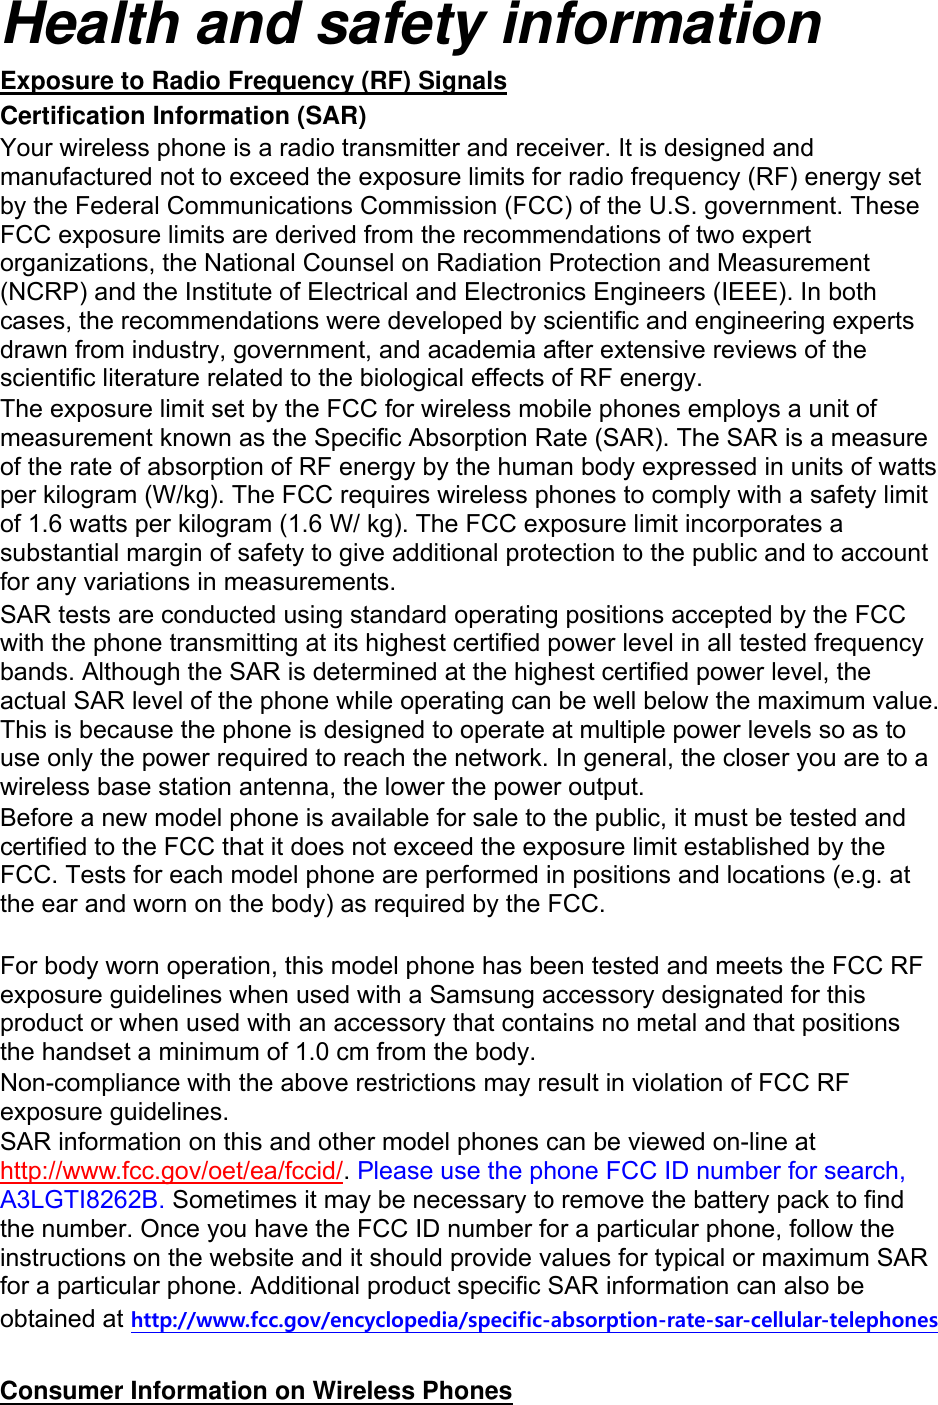 Health and safety information Exposure to Radio Frequency (RF) Signals Certification Information (SAR) Your wireless phone is a radio transmitter and receiver. It is designed and manufactured not to exceed the exposure limits for radio frequency (RF) energy set by the Federal Communications Commission (FCC) of the U.S. government. These FCC exposure limits are derived from the recommendations of two expert organizations, the National Counsel on Radiation Protection and Measurement (NCRP) and the Institute of Electrical and Electronics Engineers (IEEE). In both cases, the recommendations were developed by scientific and engineering experts drawn from industry, government, and academia after extensive reviews of the scientific literature related to the biological effects of RF energy. The exposure limit set by the FCC for wireless mobile phones employs a unit of measurement known as the Specific Absorption Rate (SAR). The SAR is a measure of the rate of absorption of RF energy by the human body expressed in units of watts per kilogram (W/kg). The FCC requires wireless phones to comply with a safety limit of 1.6 watts per kilogram (1.6 W/ kg). The FCC exposure limit incorporates a substantial margin of safety to give additional protection to the public and to account for any variations in measurements. SAR tests are conducted using standard operating positions accepted by the FCC with the phone transmitting at its highest certified power level in all tested frequency bands. Although the SAR is determined at the highest certified power level, the actual SAR level of the phone while operating can be well below the maximum value. This is because the phone is designed to operate at multiple power levels so as to use only the power required to reach the network. In general, the closer you are to a wireless base station antenna, the lower the power output. Before a new model phone is available for sale to the public, it must be tested and certified to the FCC that it does not exceed the exposure limit established by the FCC. Tests for each model phone are performed in positions and locations (e.g. at the ear and worn on the body) as required by the FCC.      For body worn operation, this model phone has been tested and meets the FCC RF exposure guidelines when used with a Samsung accessory designated for this product or when used with an accessory that contains no metal and that positions the handset a minimum of 1.0 cm from the body.   Non-compliance with the above restrictions may result in violation of FCC RF exposure guidelines. SAR information on this and other model phones can be viewed on-line at http://www.fcc.gov/oet/ea/fccid/. Please use the phone FCC ID number for search, A3LGTI8262B. Sometimes it may be necessary to remove the battery pack to find the number. Once you have the FCC ID number for a particular phone, follow the instructions on the website and it should provide values for typical or maximum SAR for a particular phone. Additional product specific SAR information can also be obtained at http://www.fcc.gov/encyclopedia/specific-absorption-rate-sar-cellular-telephones  Consumer Information on Wireless Phones 